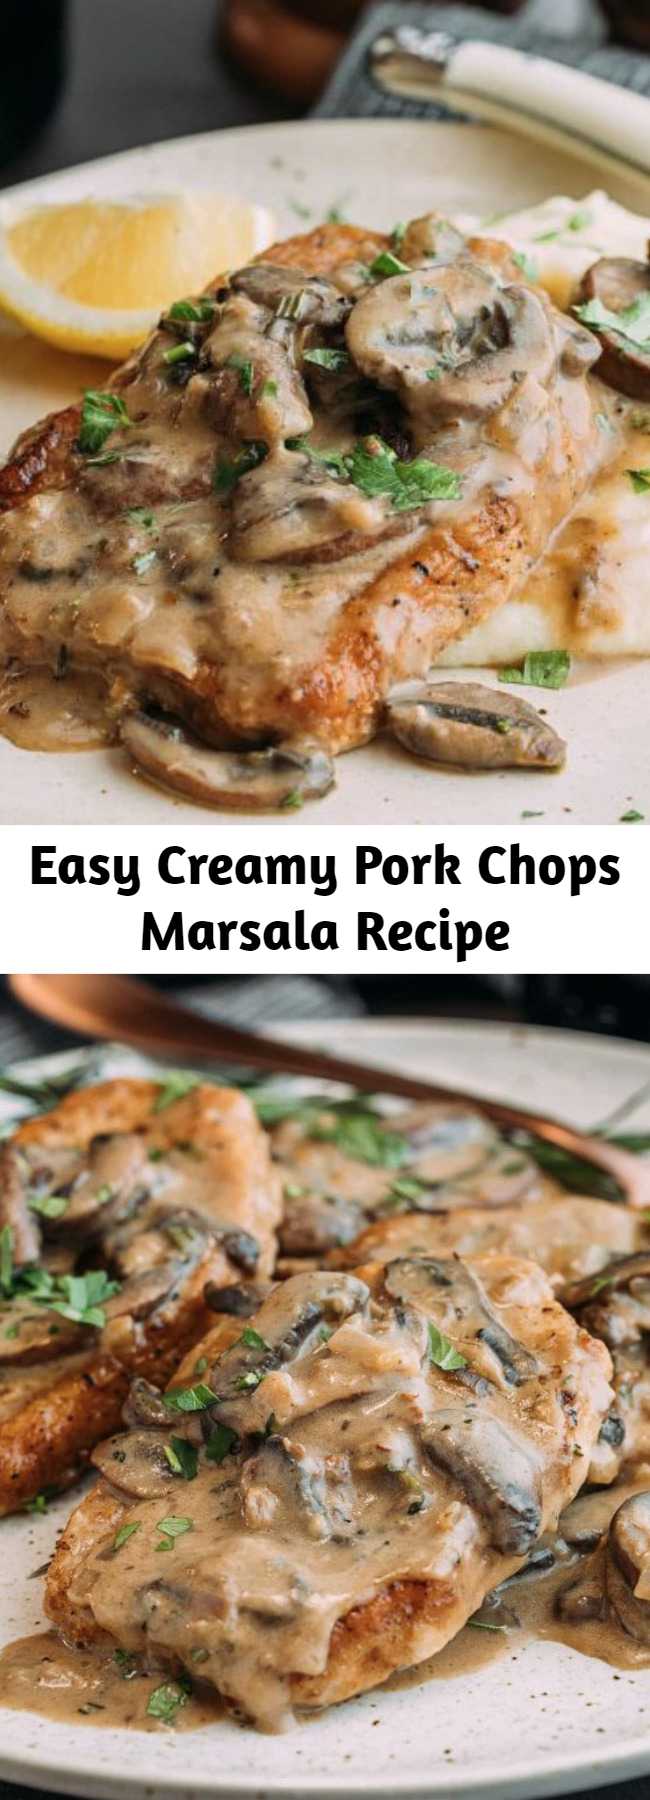 Easy Creamy Pork Chops Marsala Recipe - This easy pork marsala recipe is a great option for treating yourself on a busy night, or for serving to guests. With the rich and flavorful sauce, no one will believe it only took 30 minutes of cooking time! Perfect for entertaining! #porkchops #easydinner